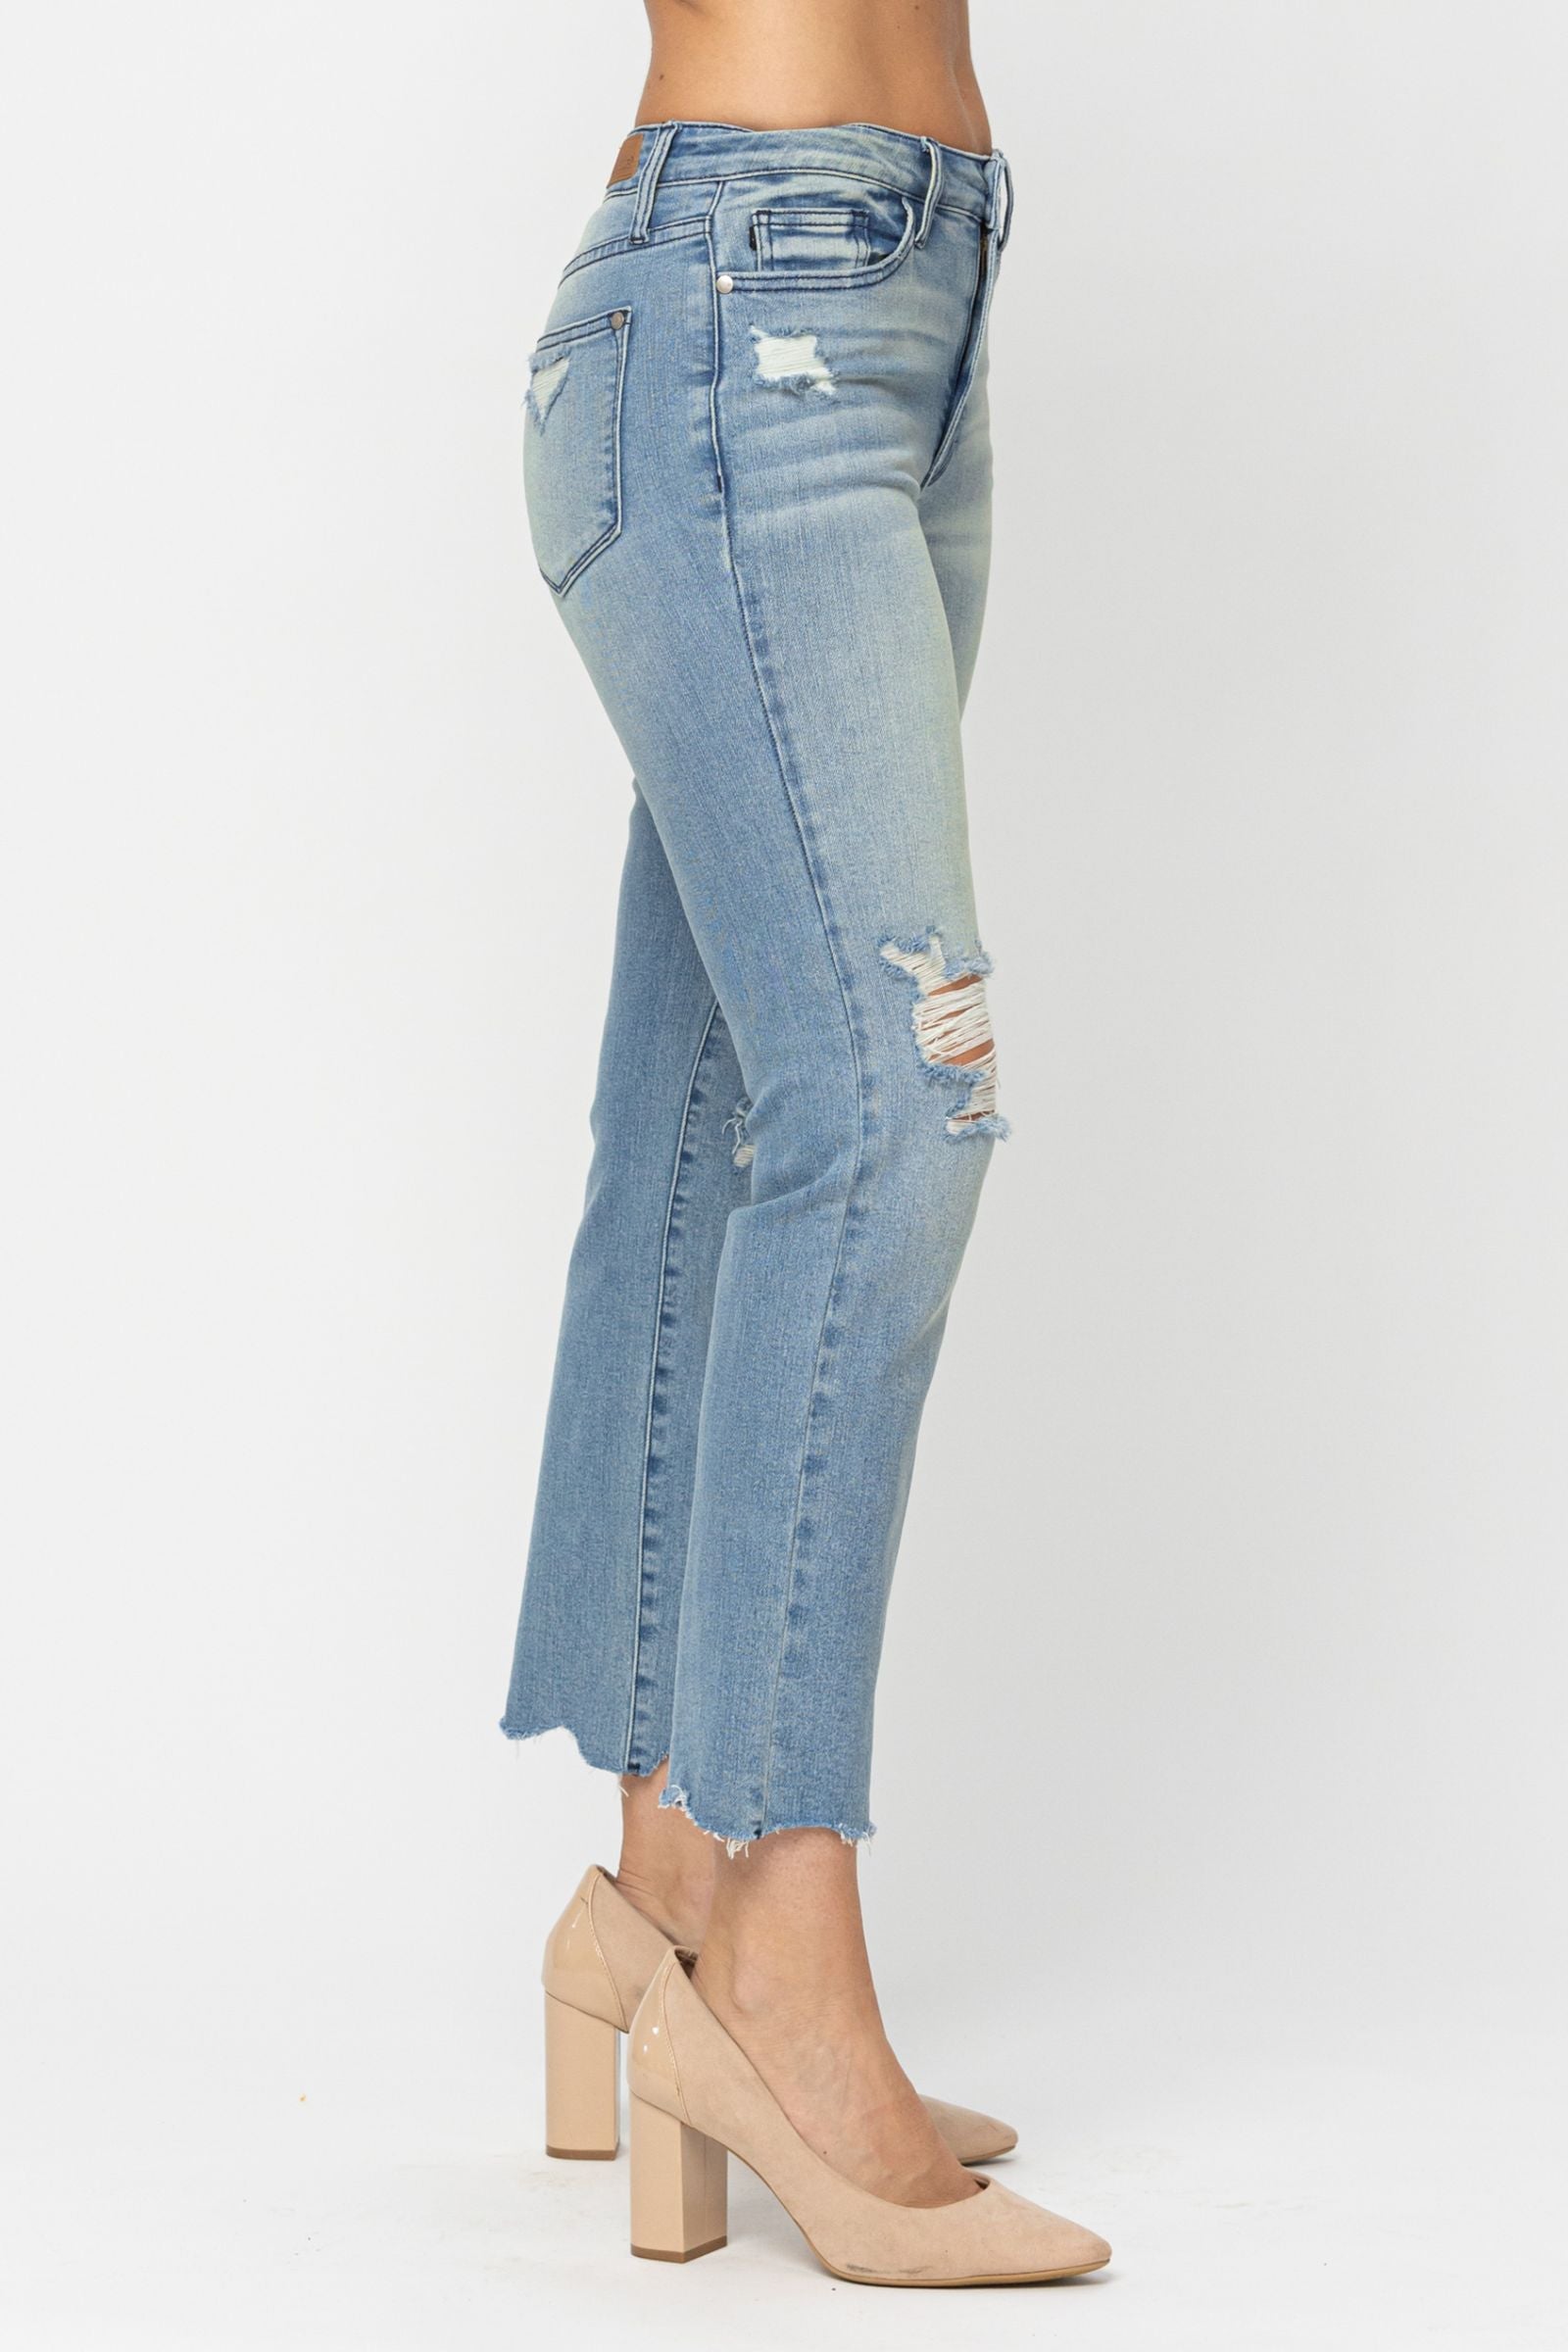 Judy Blue Destroyed Cropped Straight Leg Plus